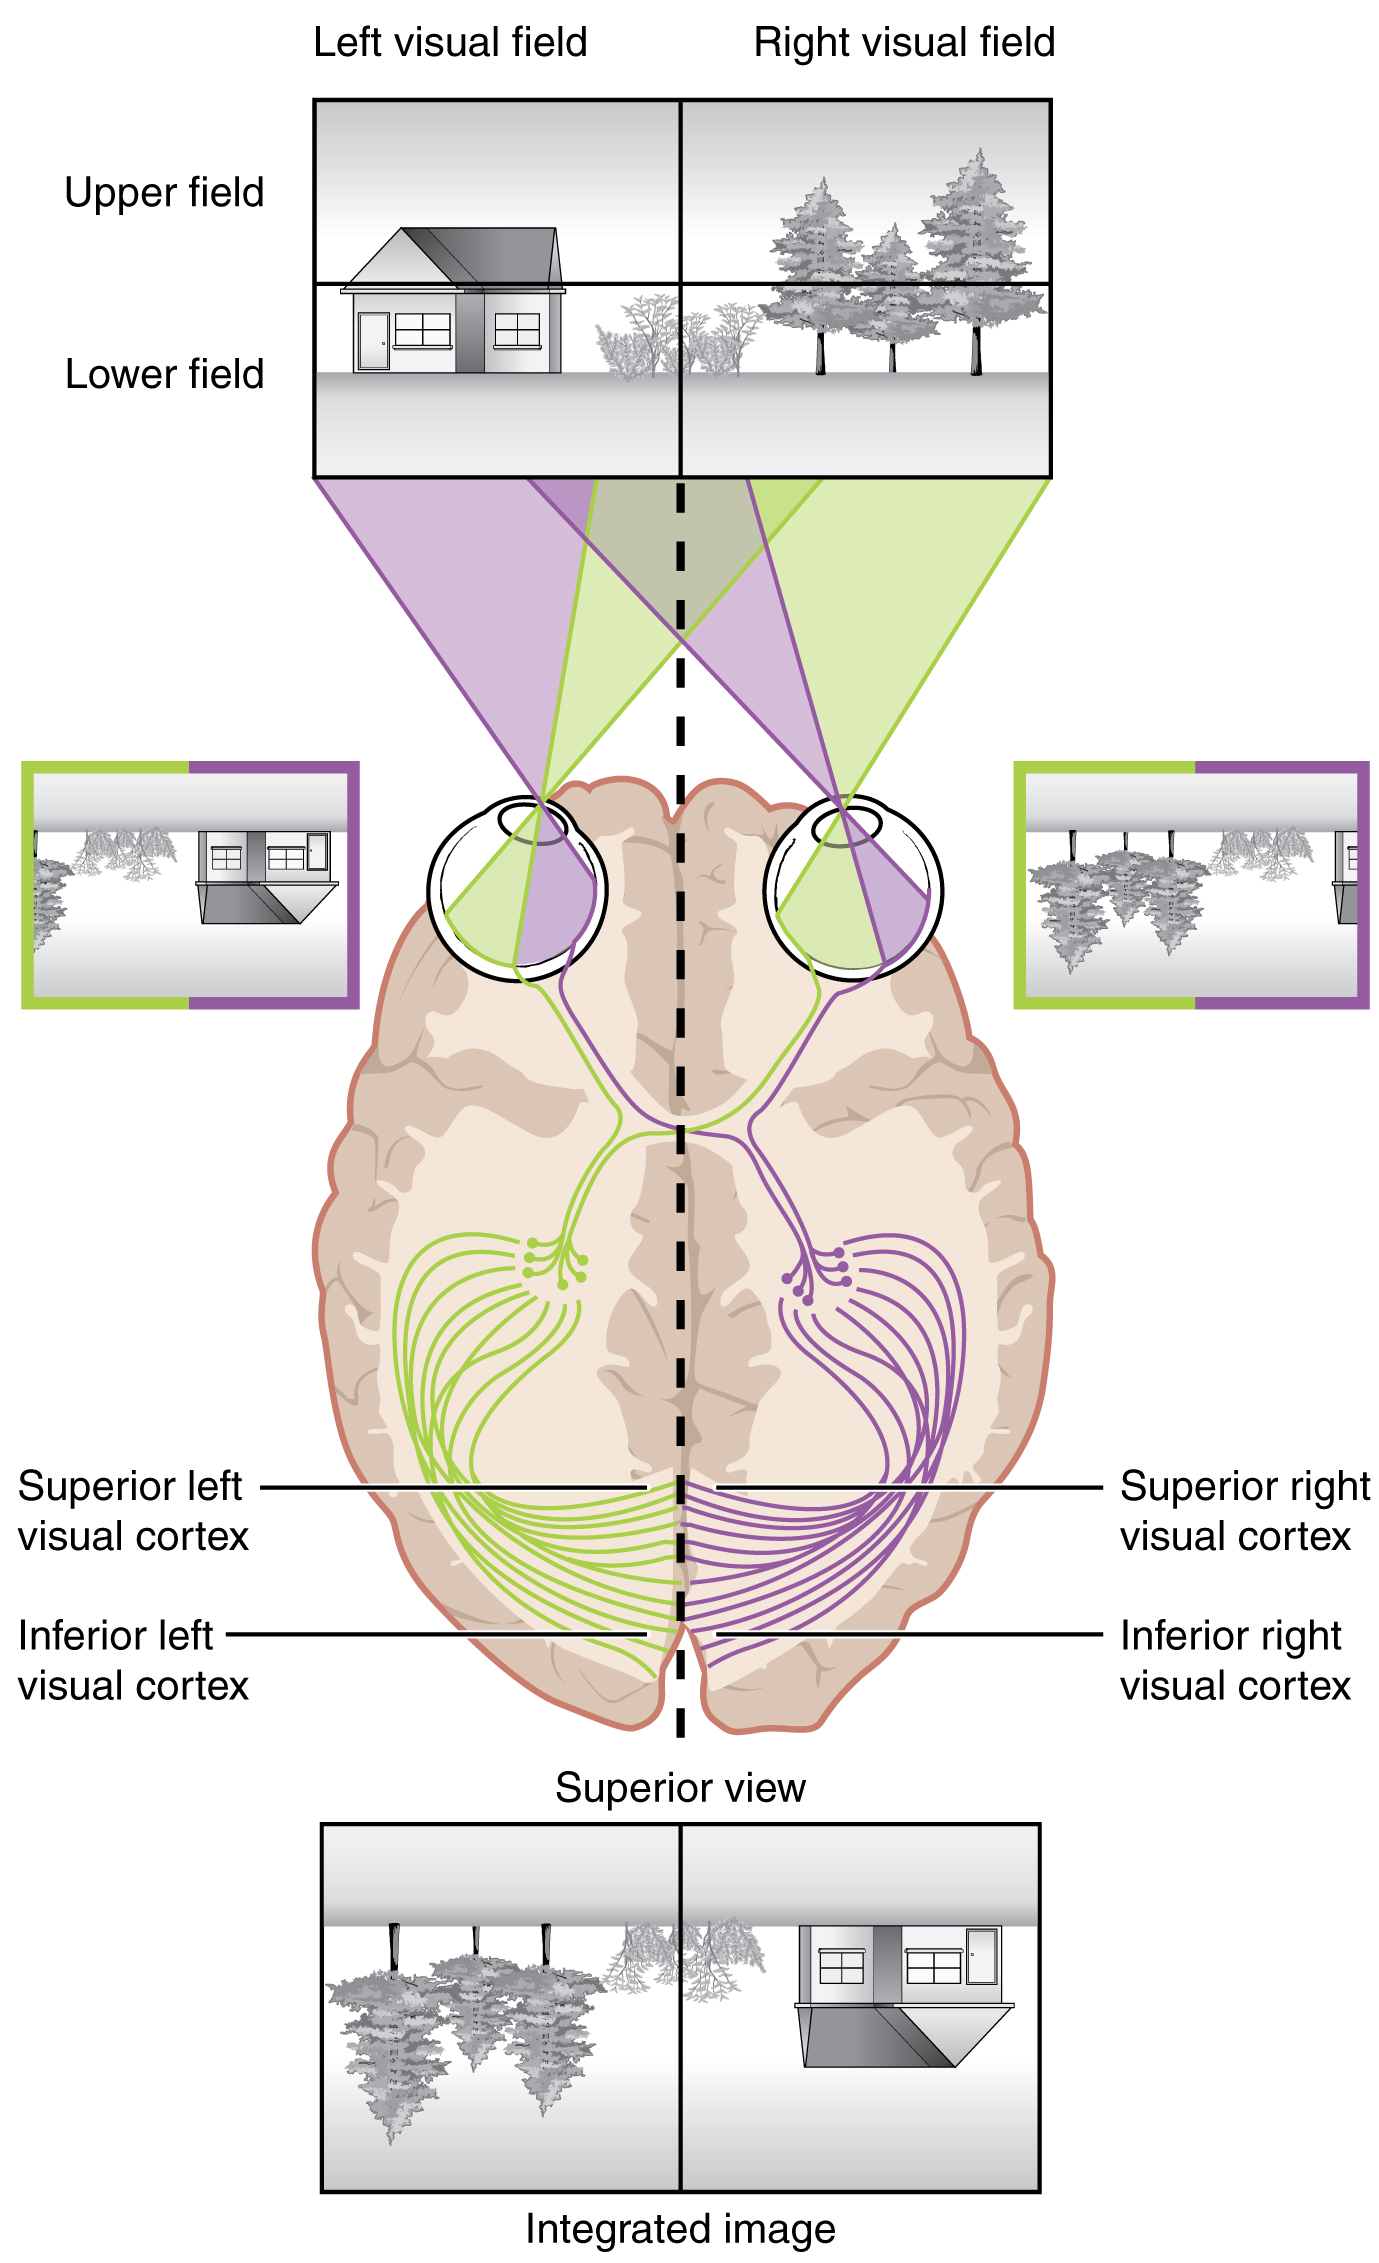 Image divided into the visual fields and shows as projected in the retina and visual cortex